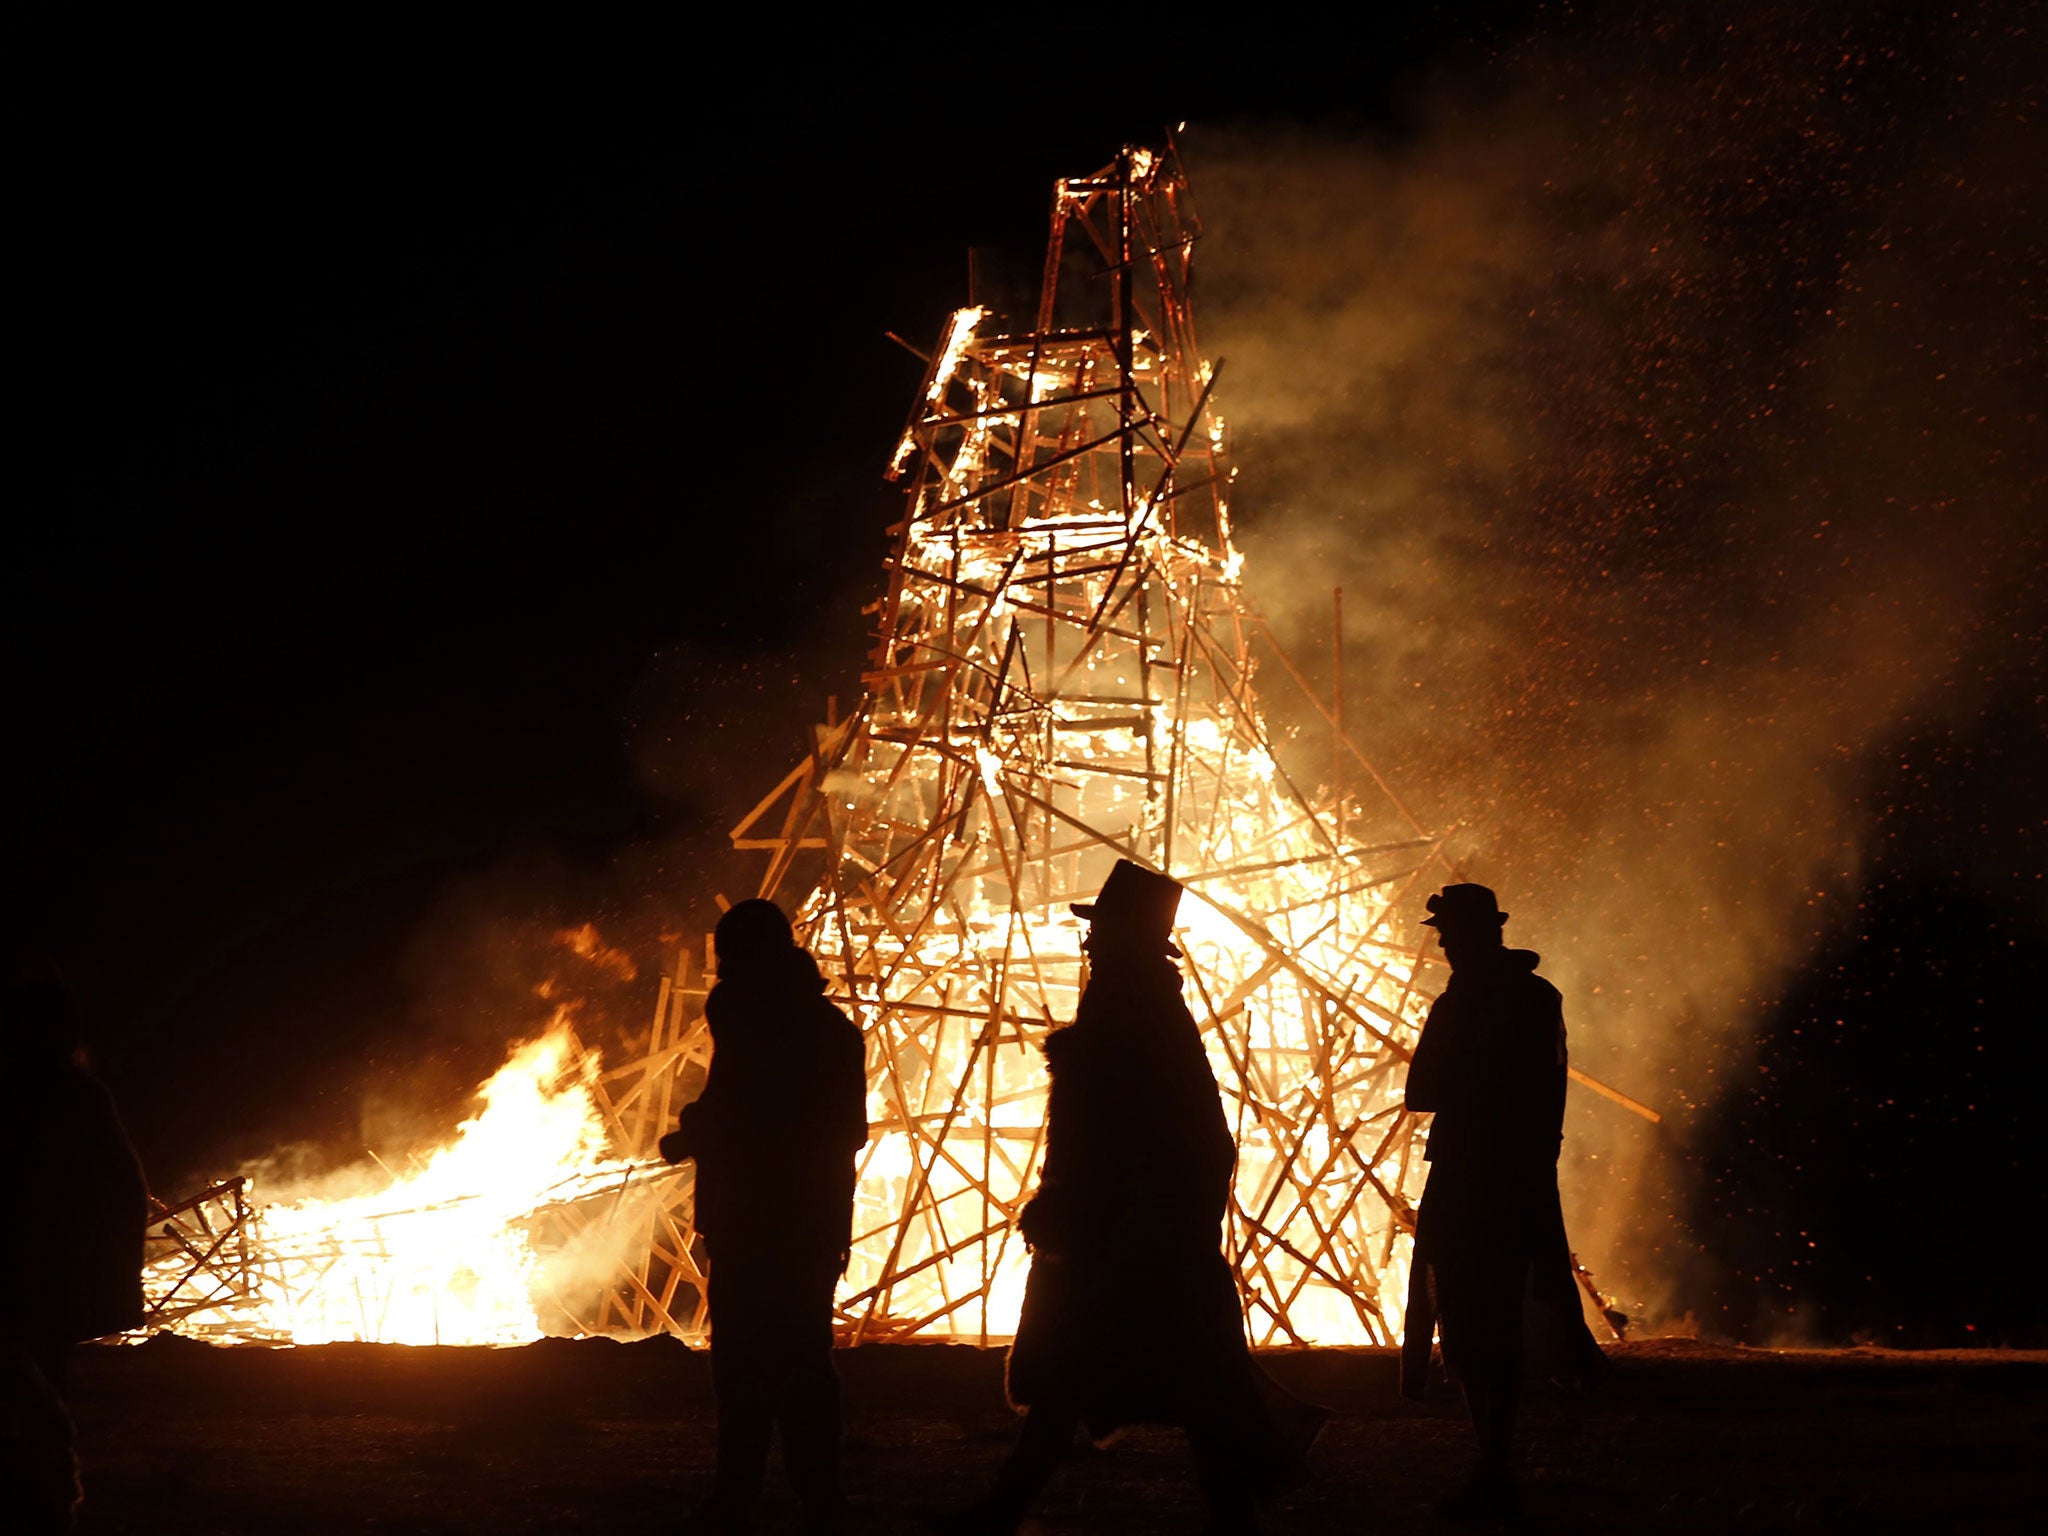 A wooden effigy is burned at the 2015 Midburn festival in Israel